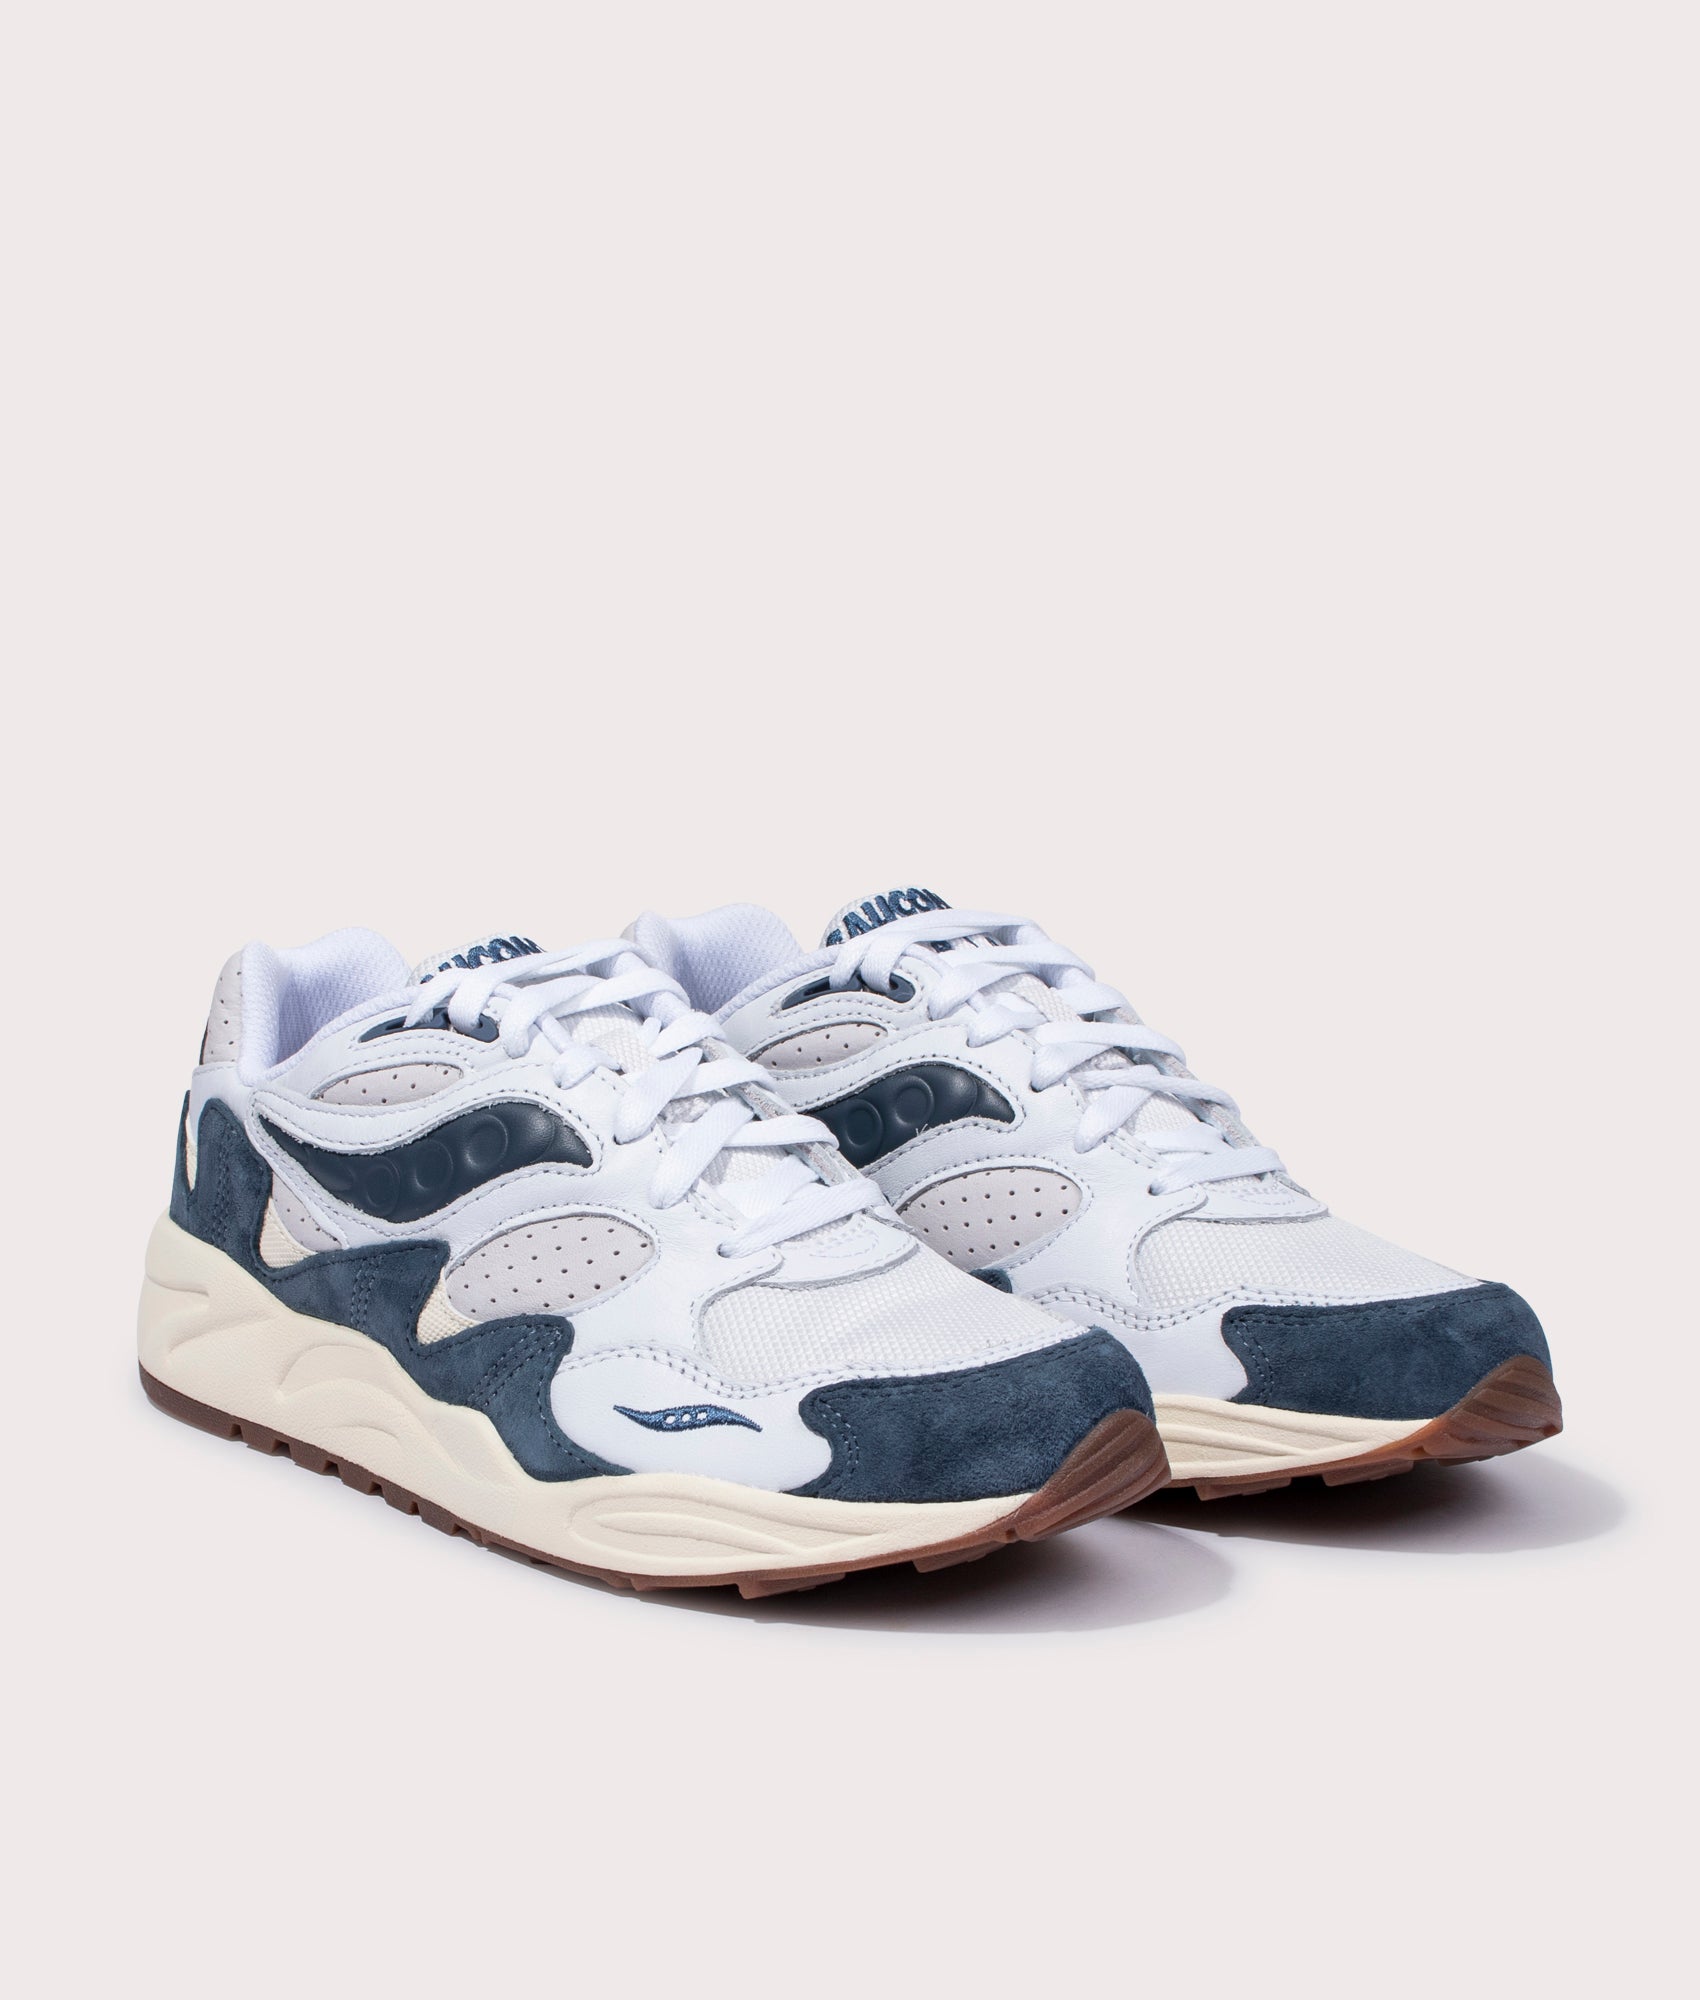 Saucony Mens Grid Shadow 2 Sneakers - Colour: 100 White/Navy - Size: 8